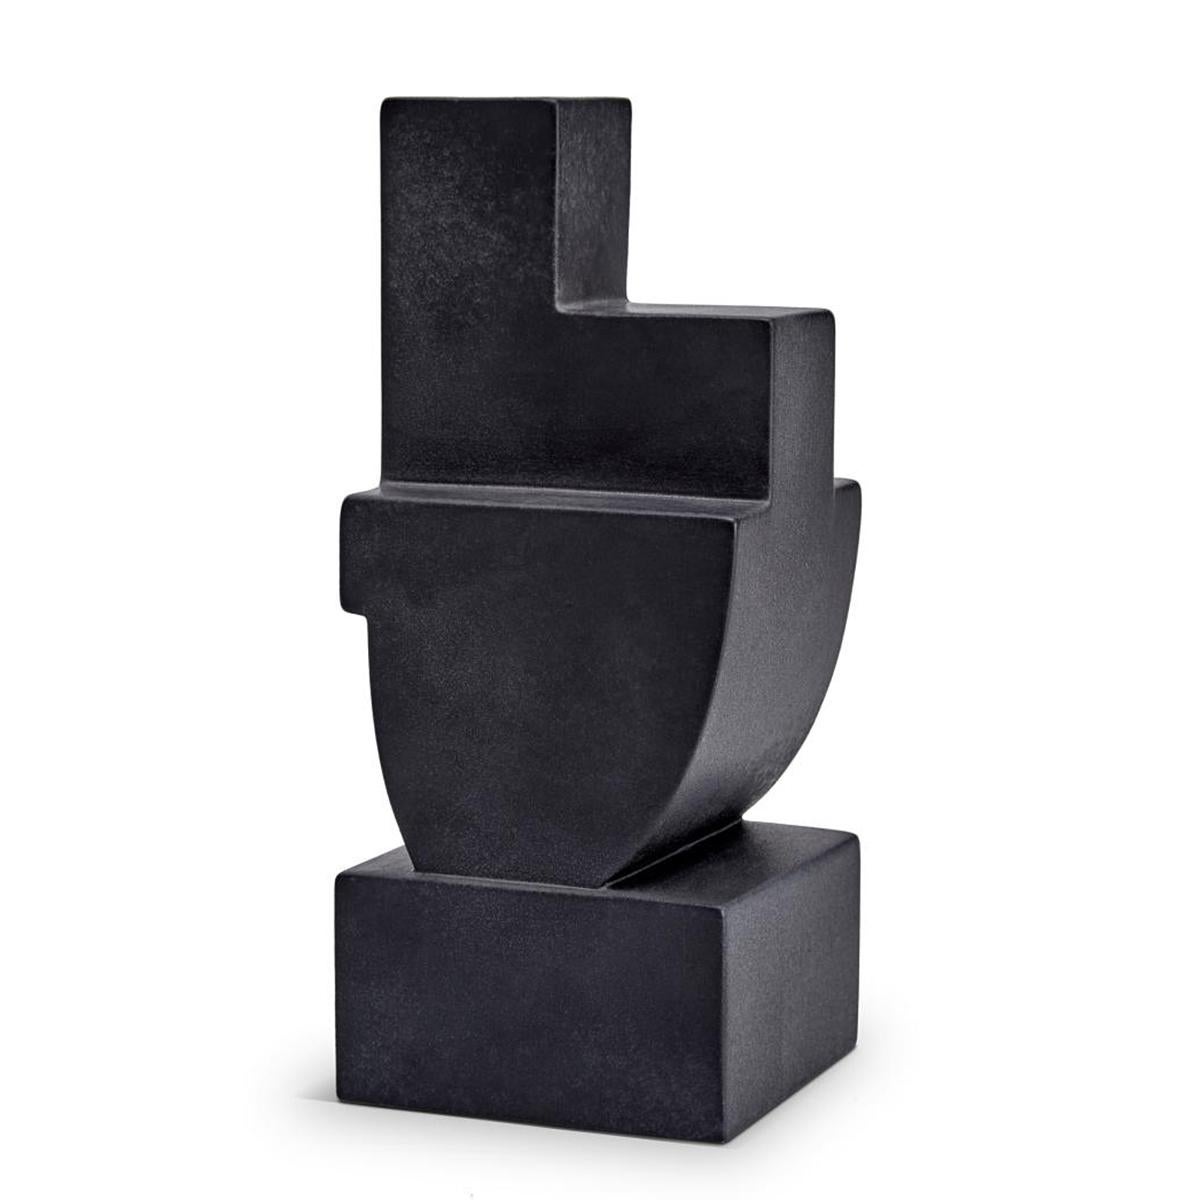 Hand-Crafted Pâcques Set of 2 Bookend